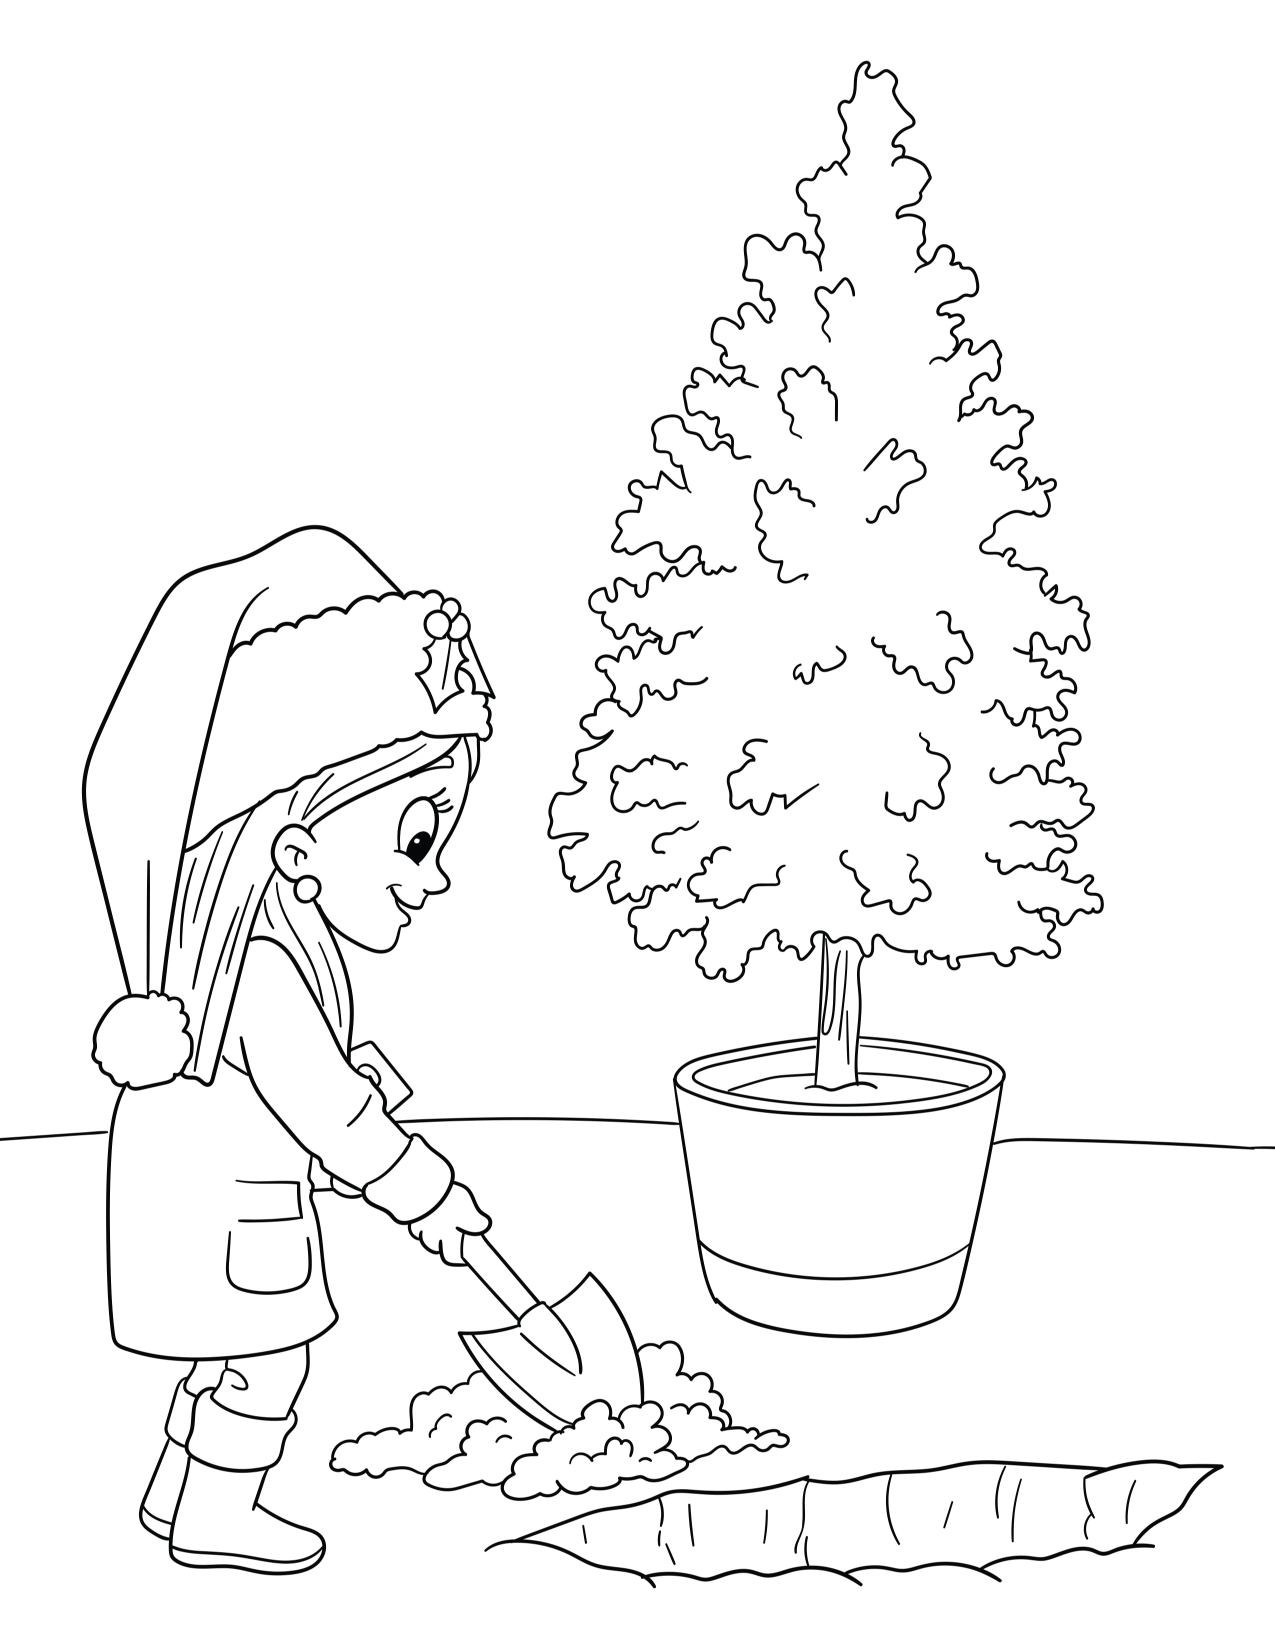 Holly Holiday Downloadable Coloring Pages